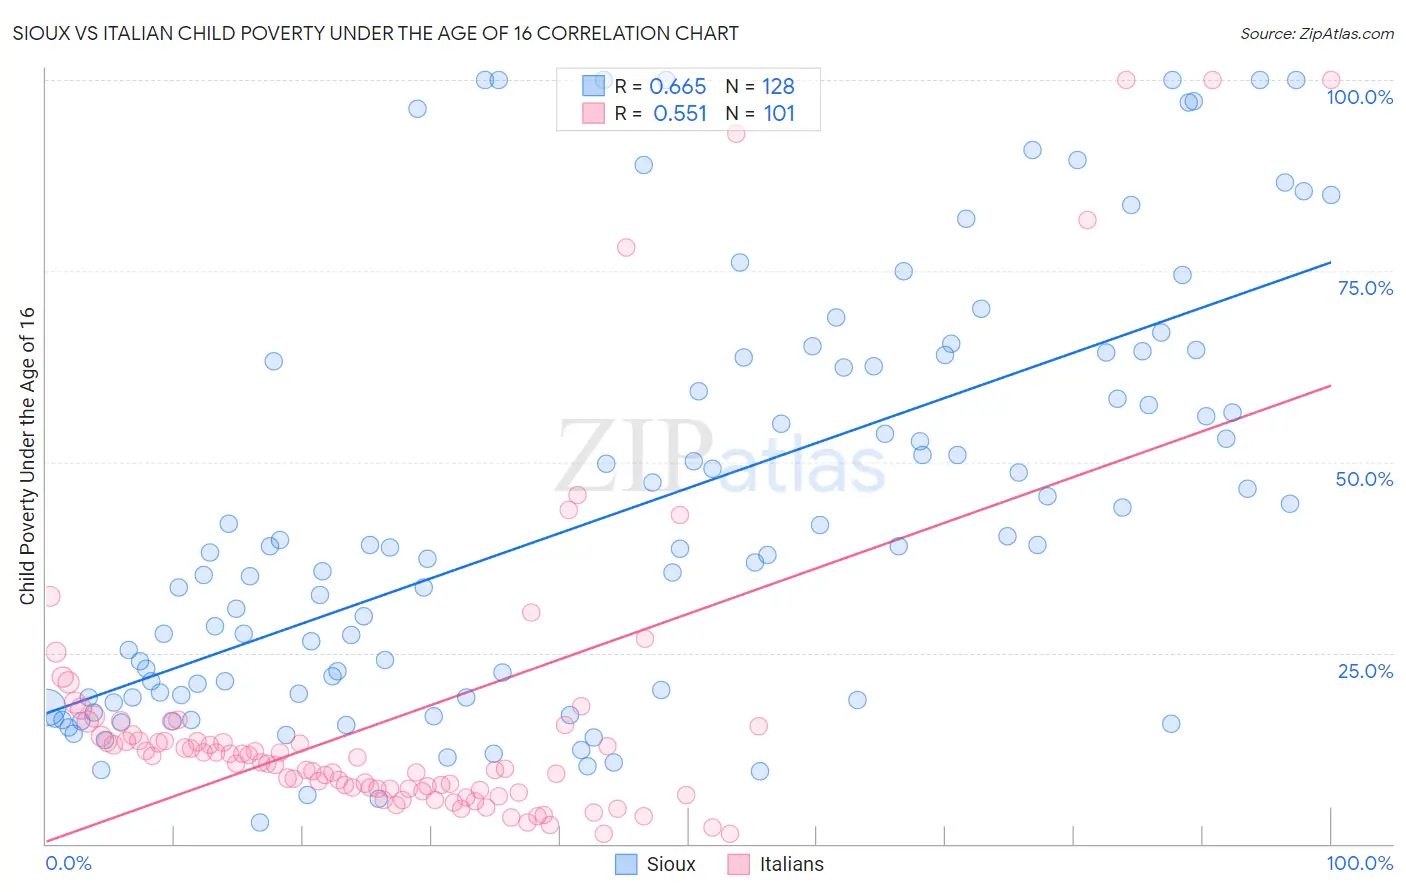 Sioux vs Italian Child Poverty Under the Age of 16